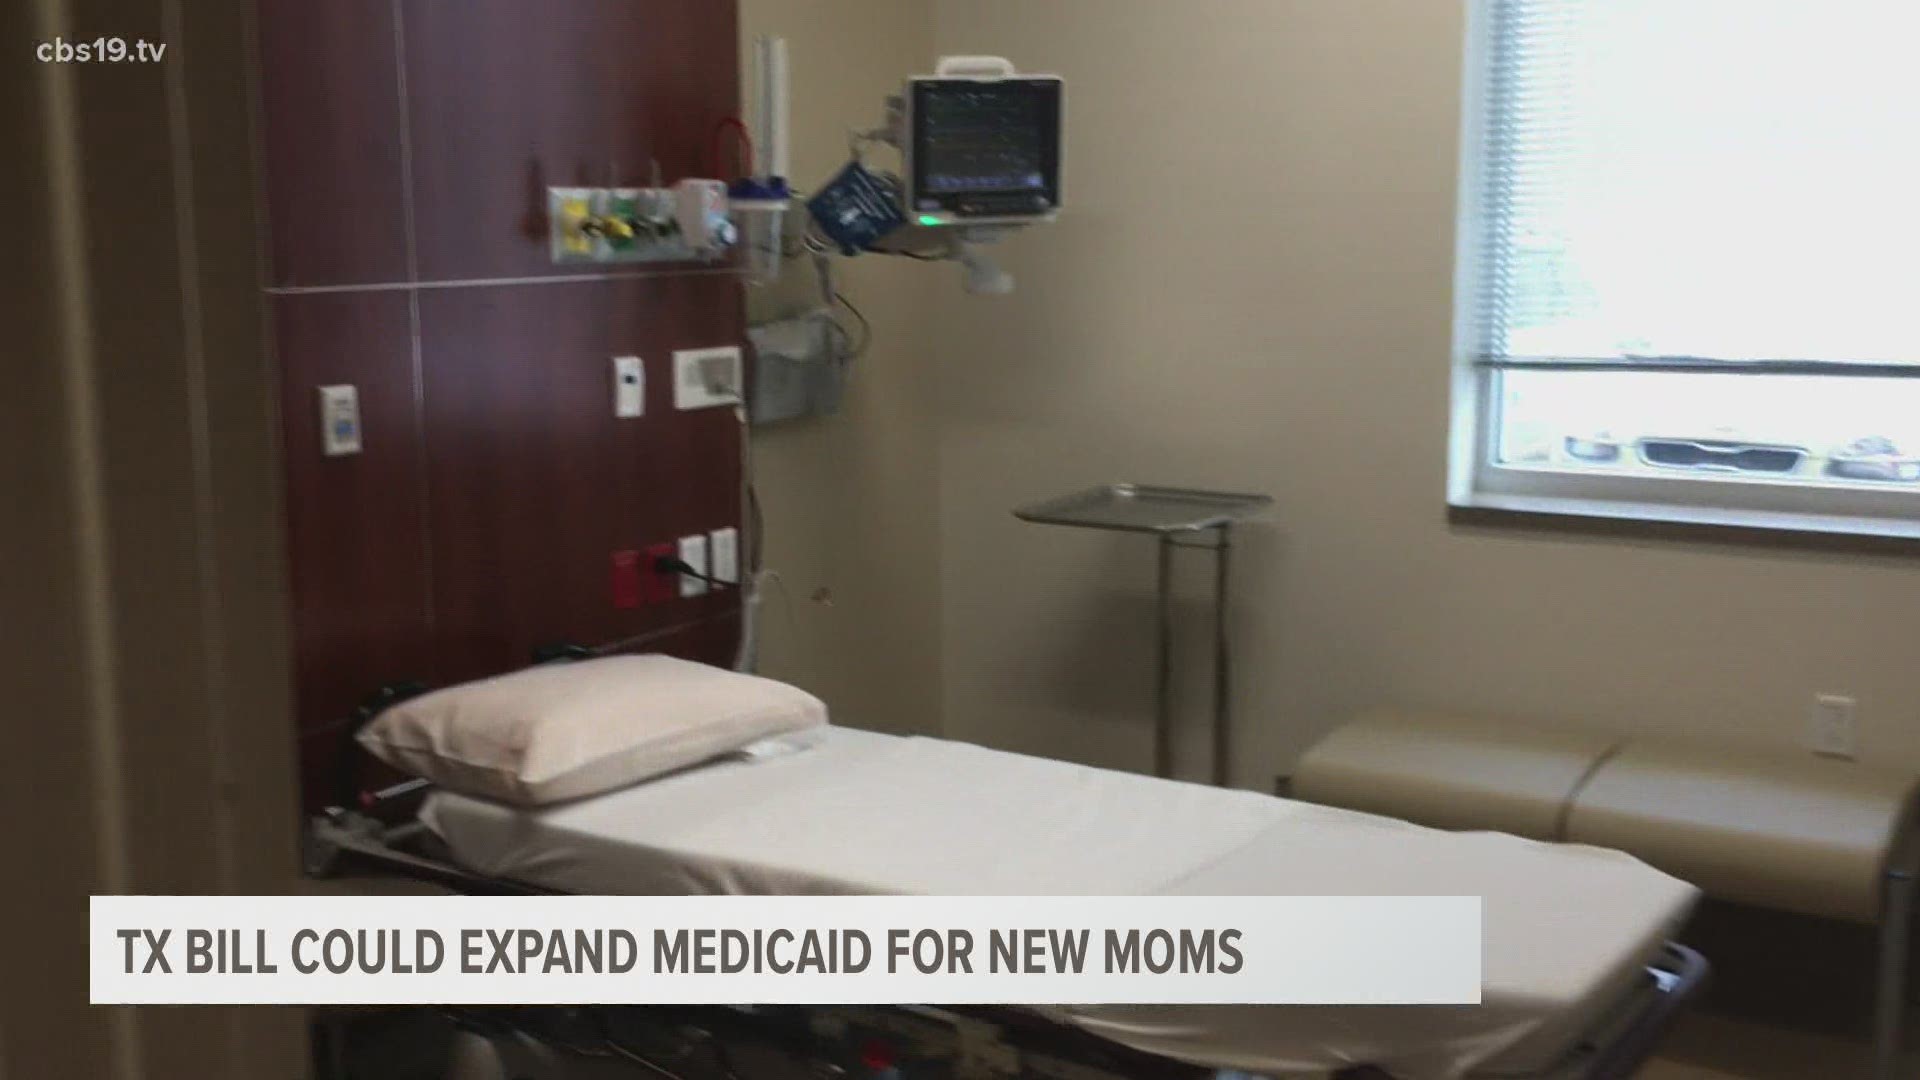 A proposed House Bill would extend Medicaid coverage for new moms up to a year.